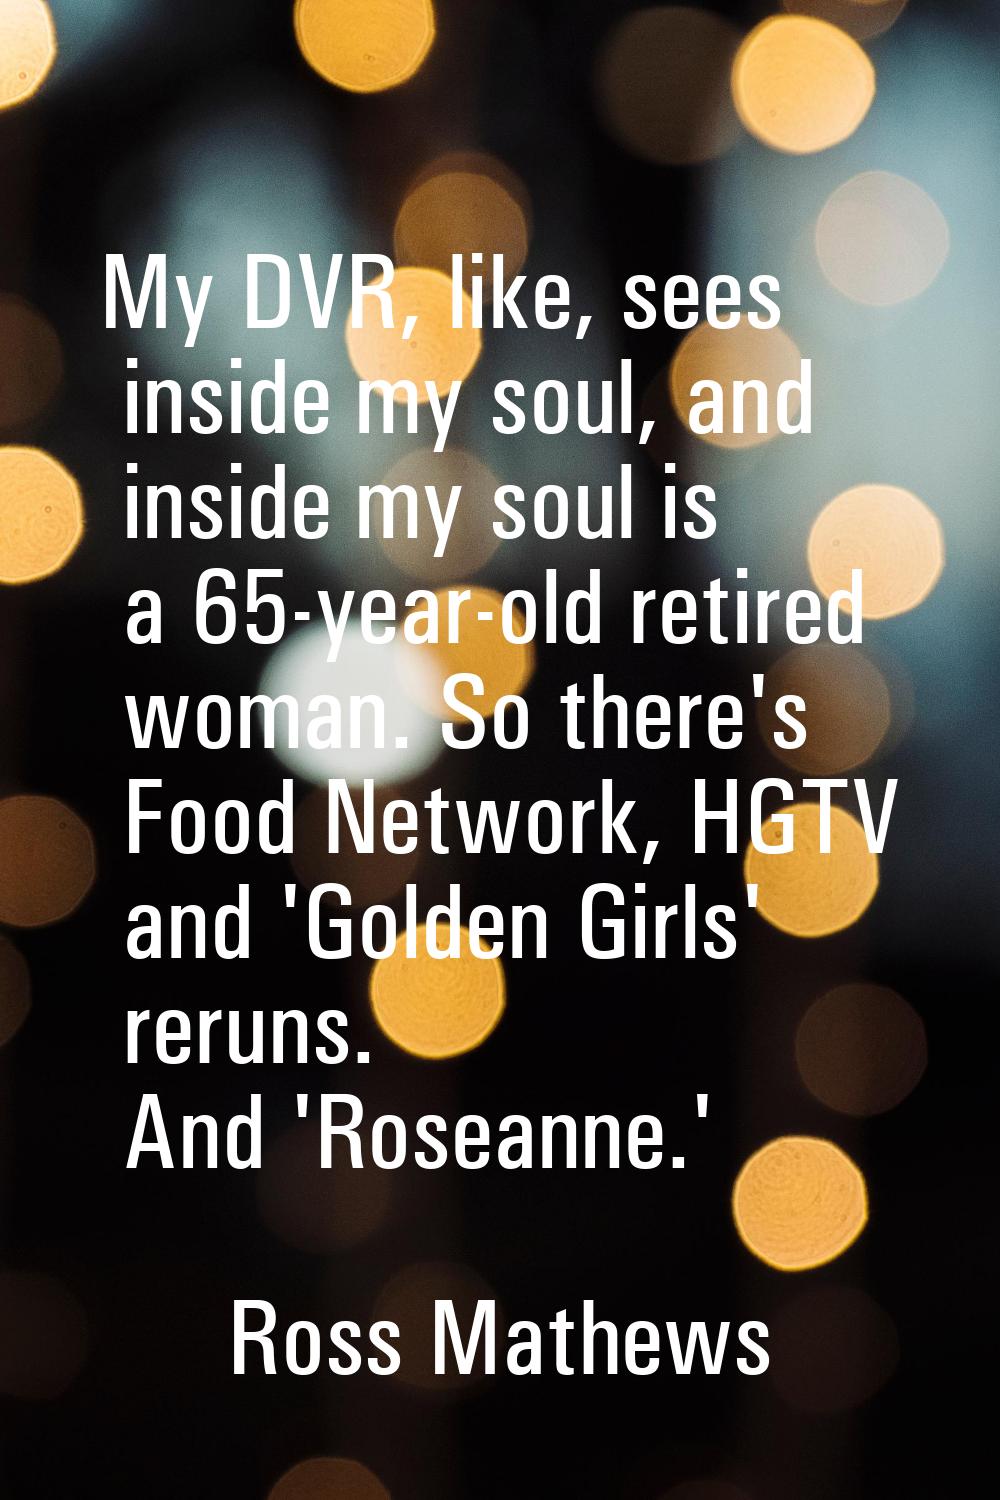 My DVR, like, sees inside my soul, and inside my soul is a 65-year-old retired woman. So there's Fo